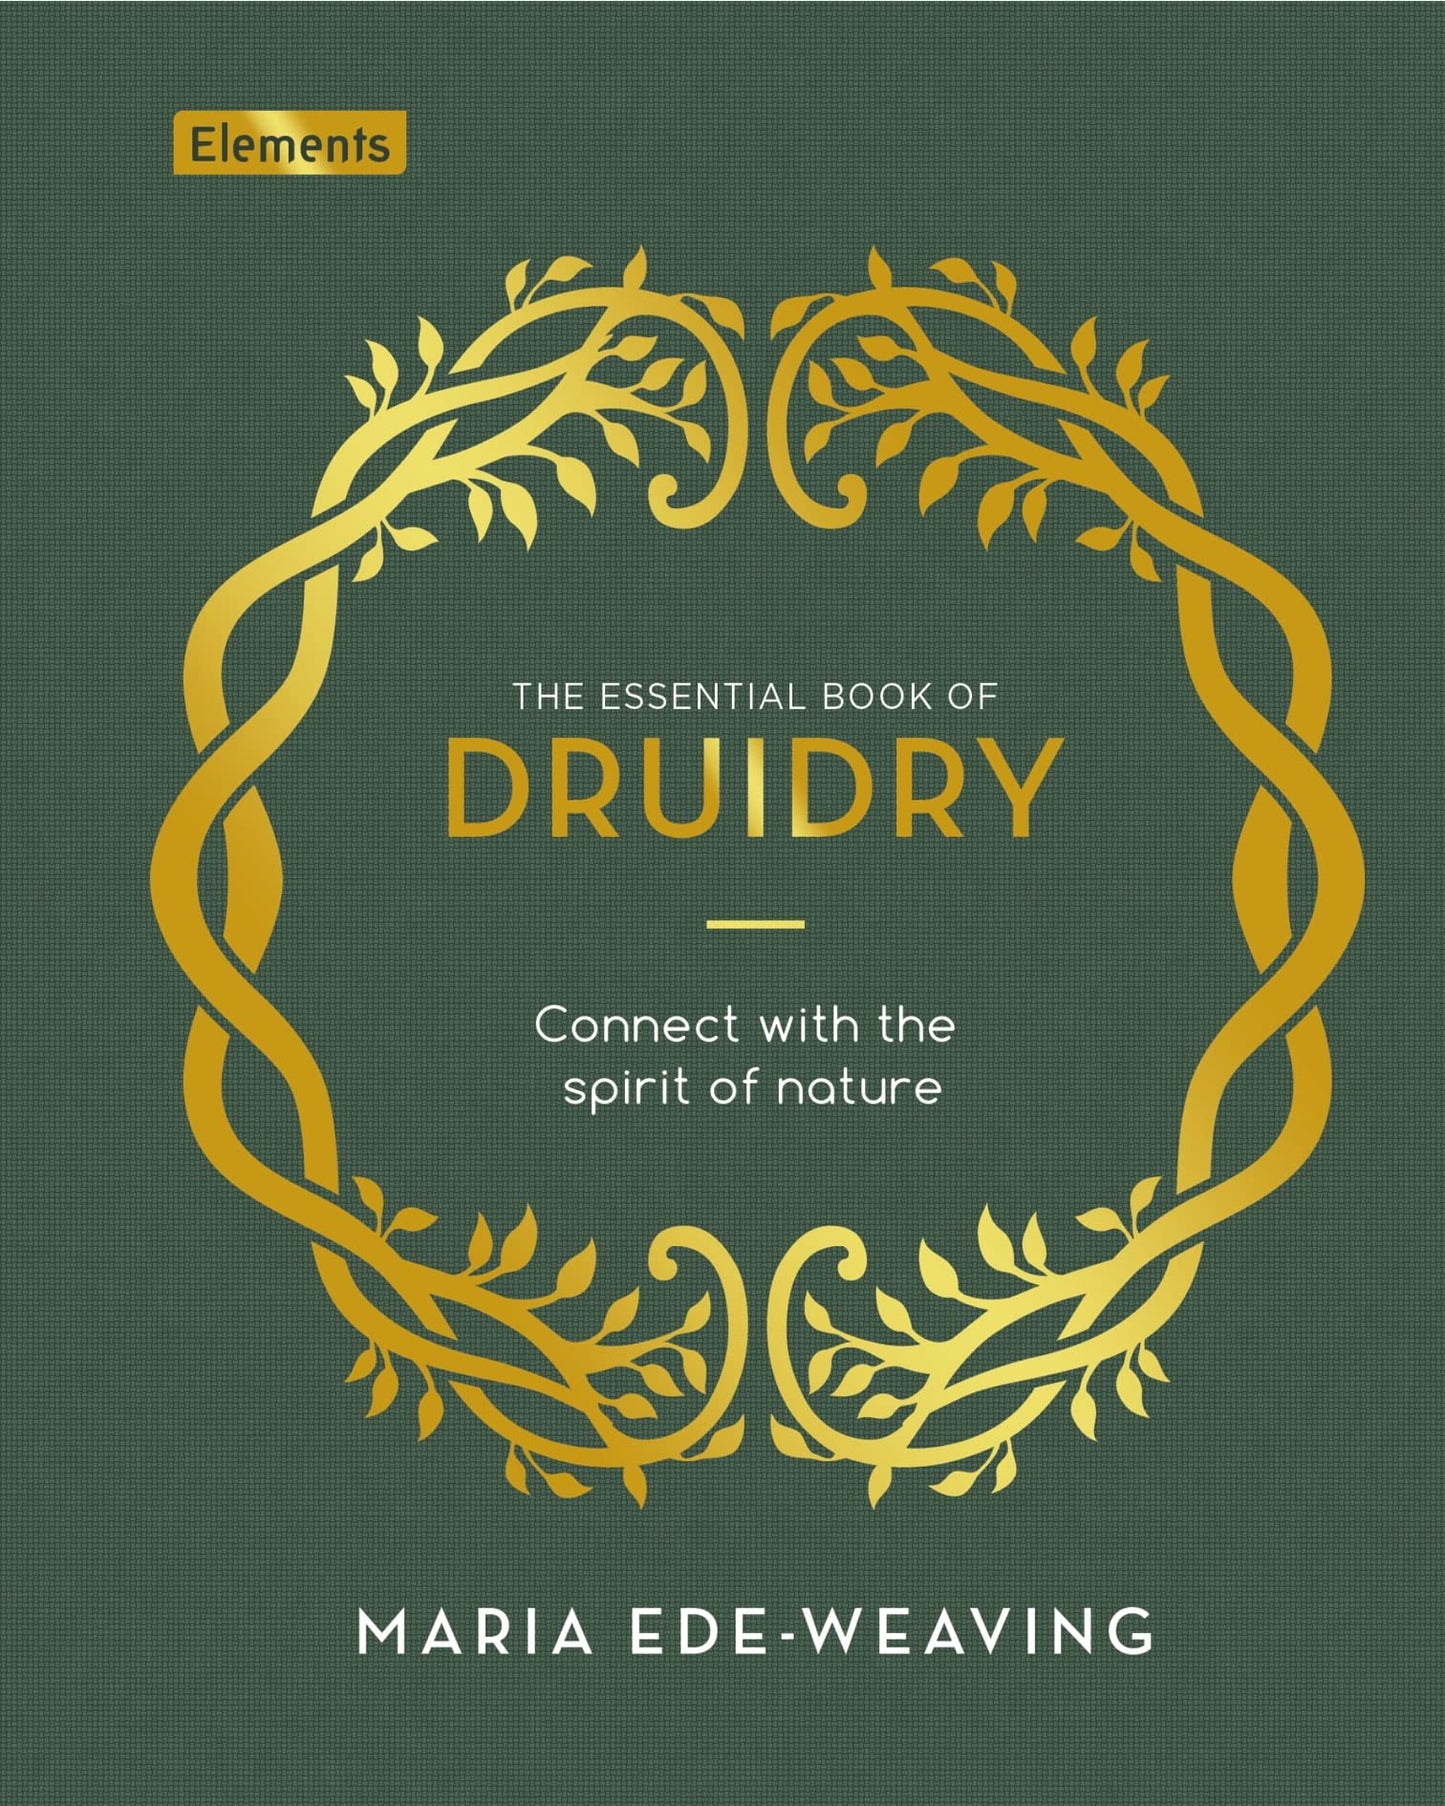 The Essential Book of Druidry: Connect with the Spirit of Nature by Maria Ede-Weaving